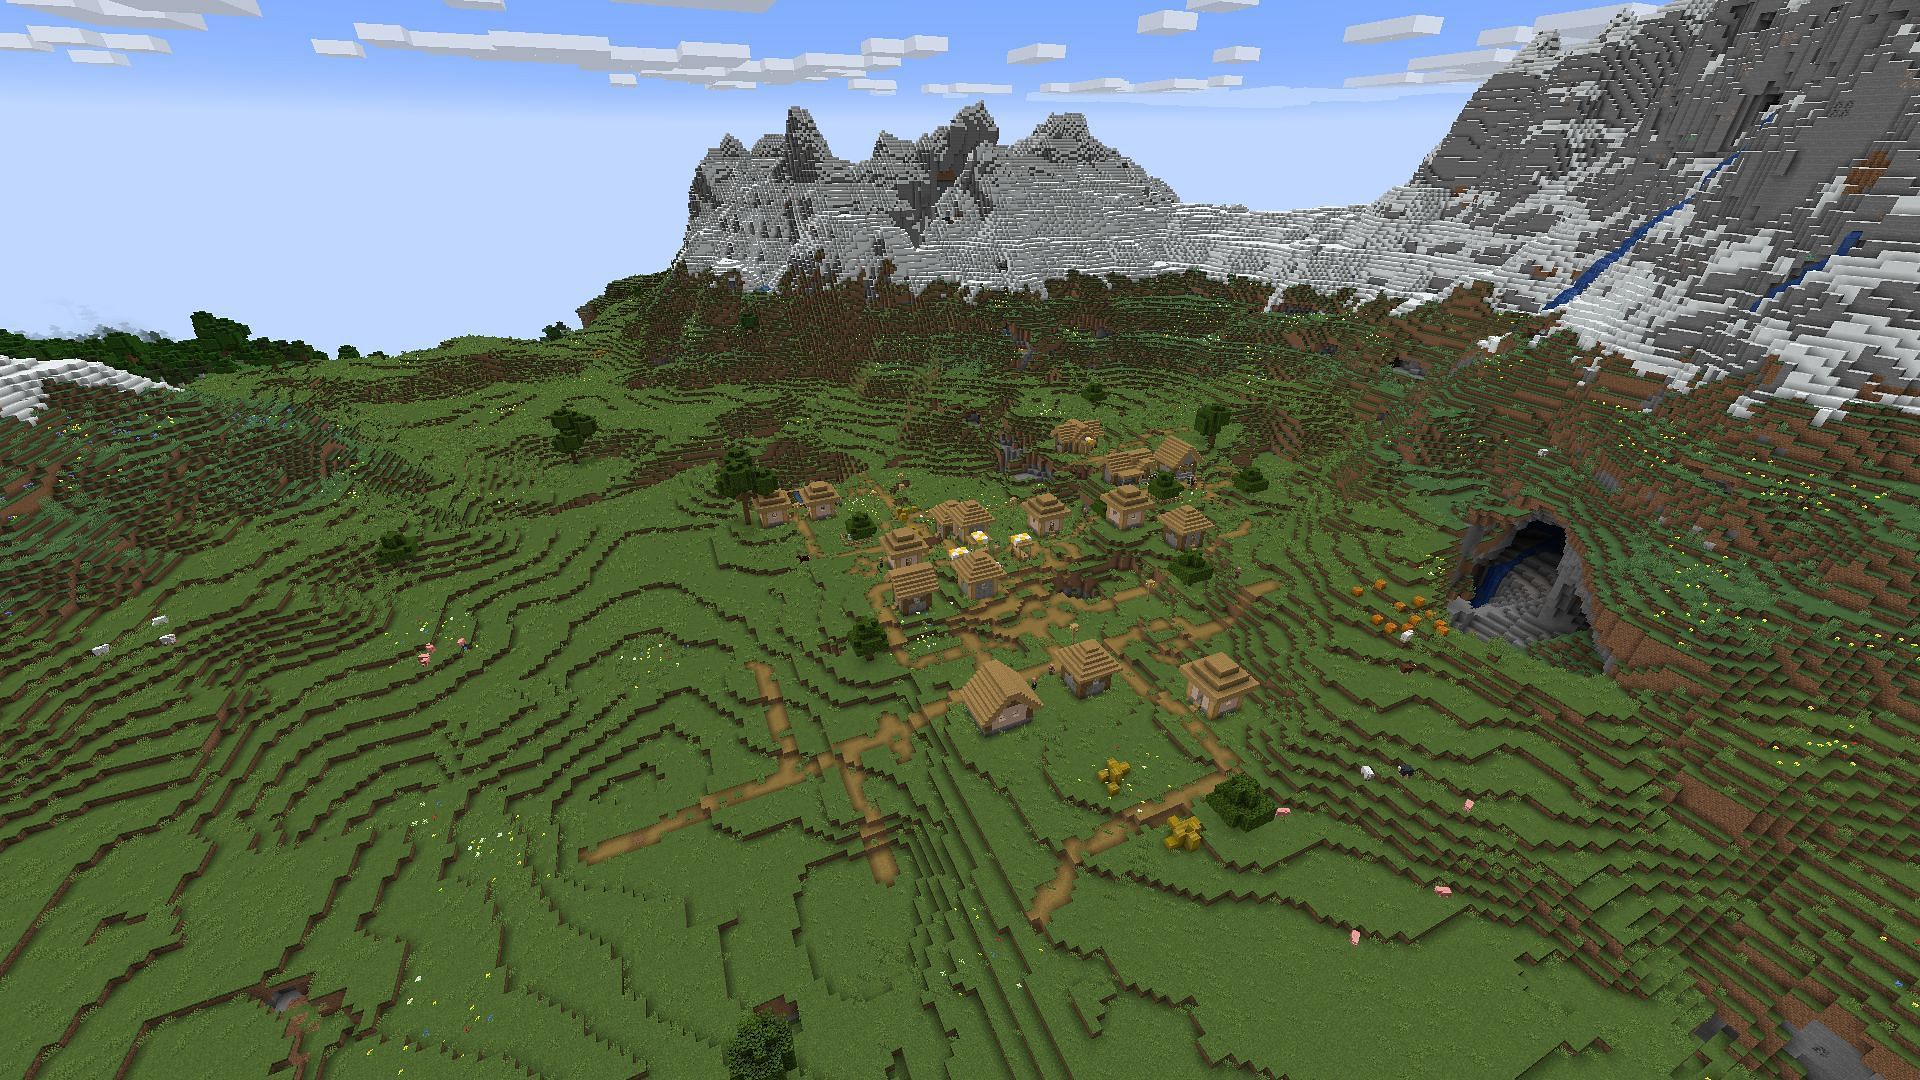 This Minecraft village is close to spawn and in a magnificent starting location (Image via Pacergramfitnesstest/Reddit)